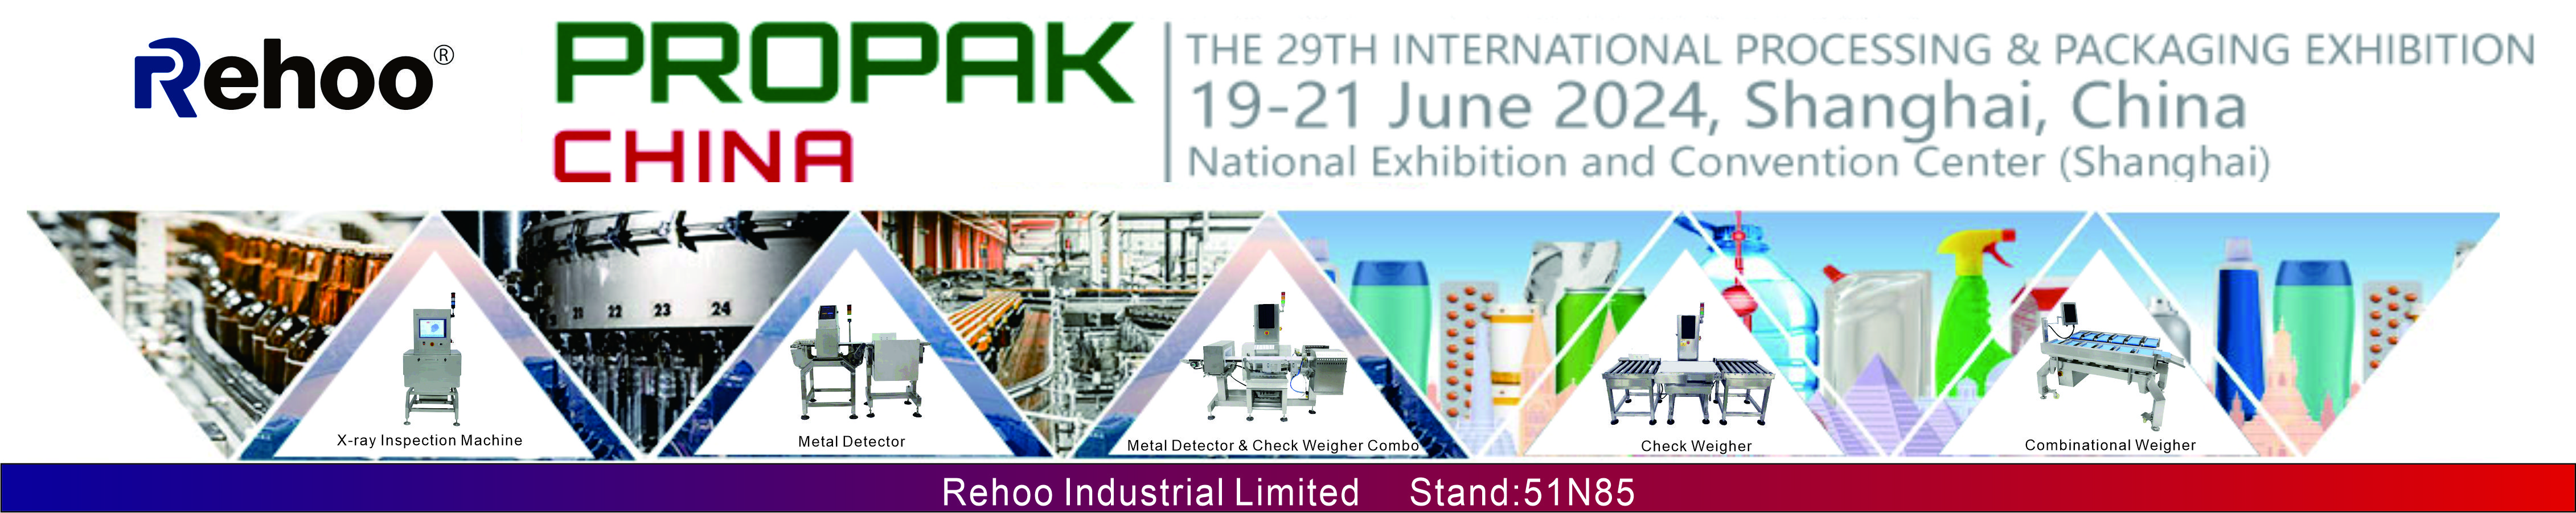 The 29th International Processing & Packaging Exhibition